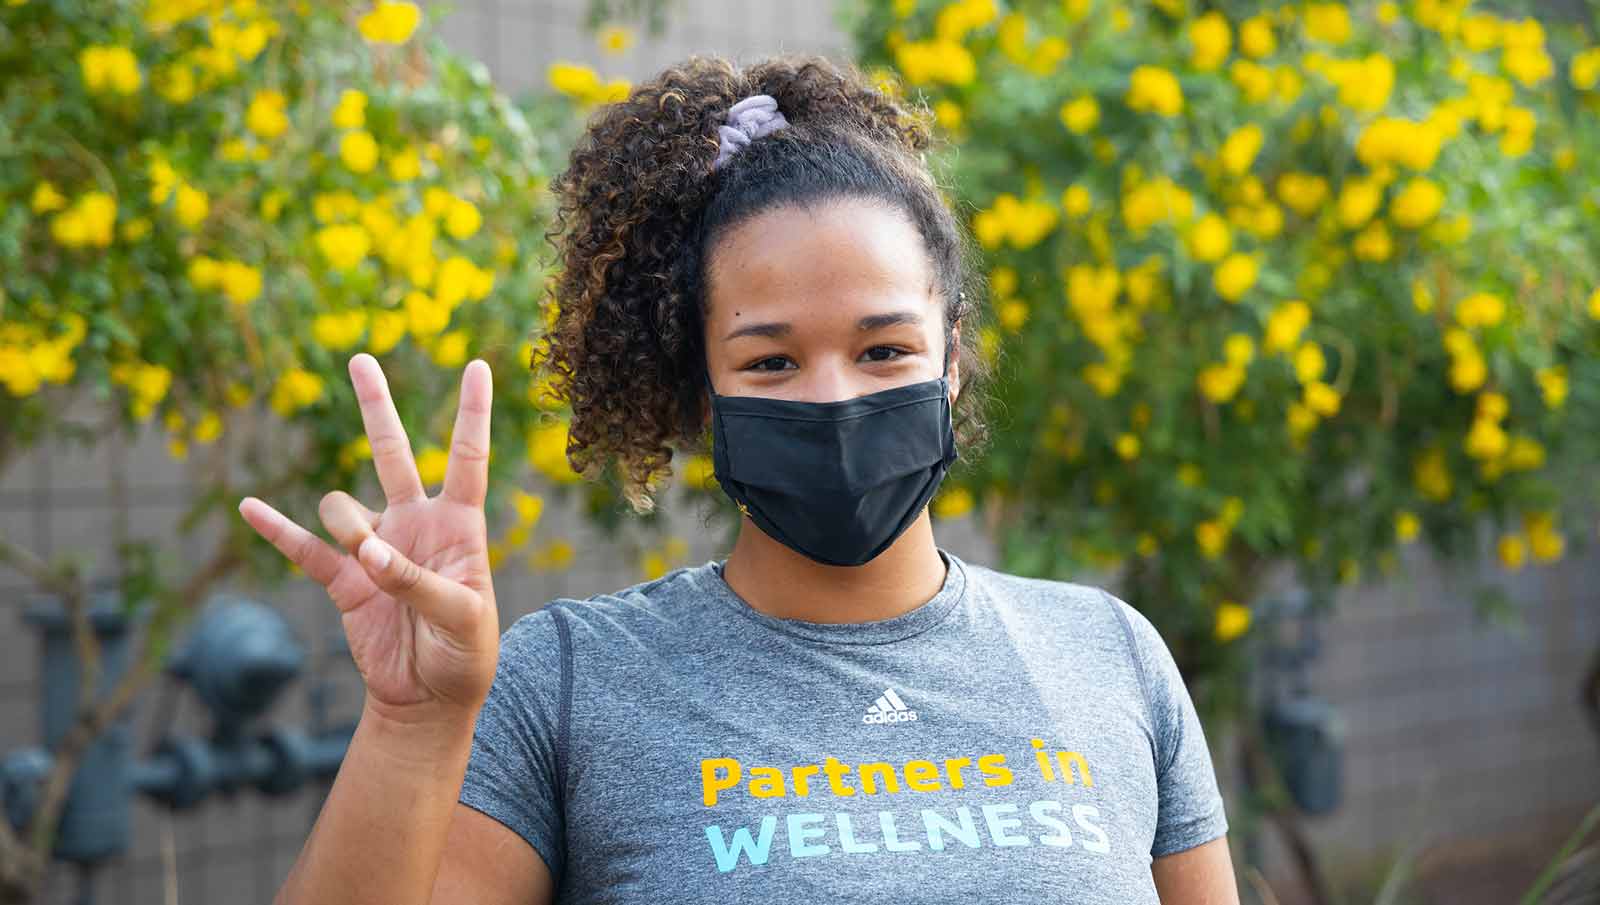 Female student wearing a mask and showing forks up hand sign